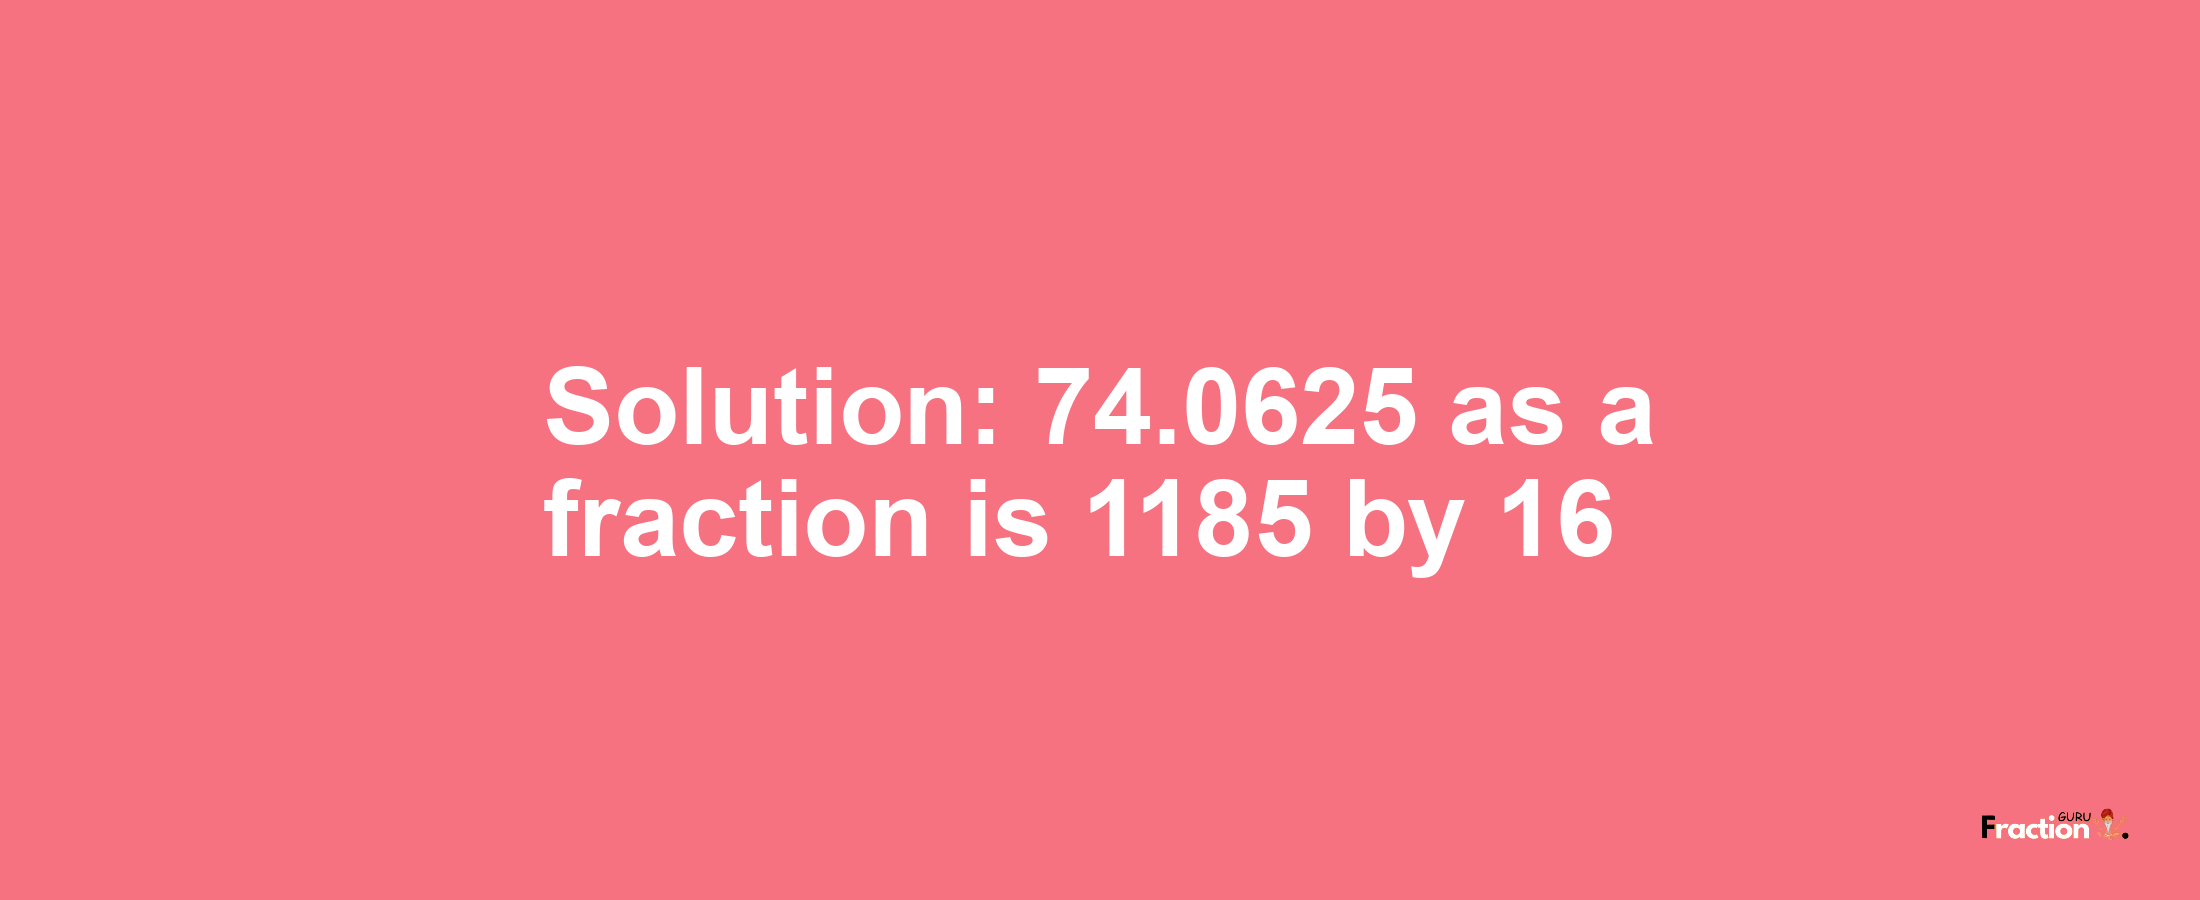 Solution:74.0625 as a fraction is 1185/16